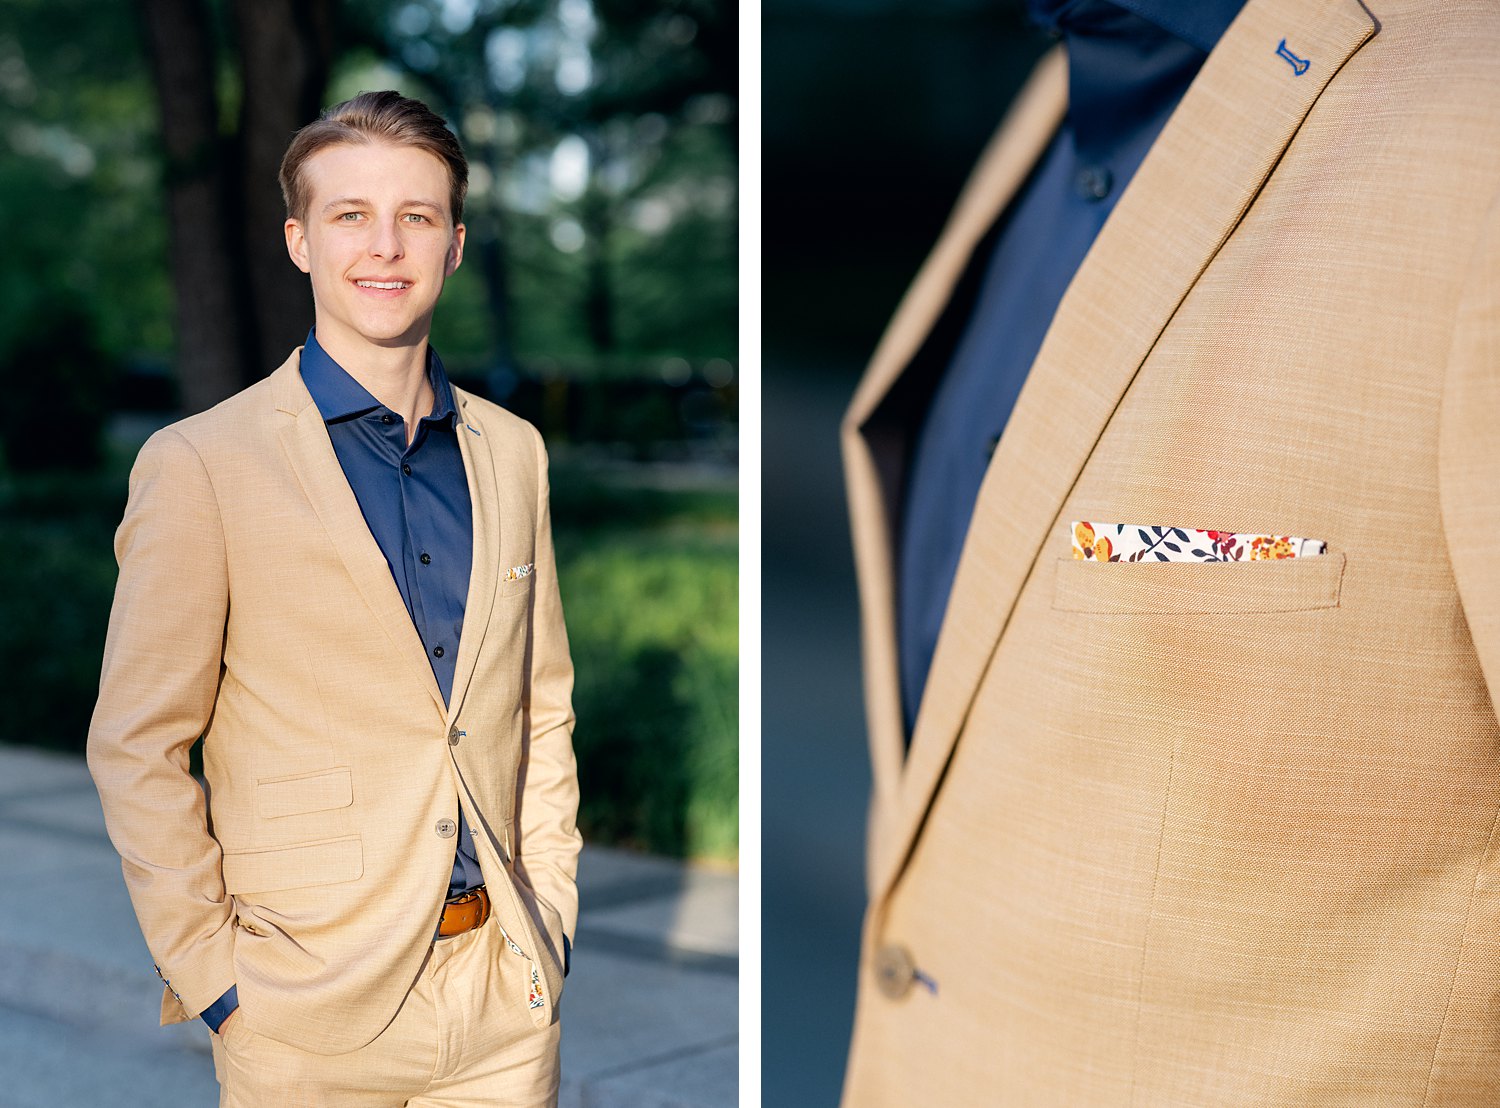 Man in tan suit and blue shirt with floral pocket square portrait